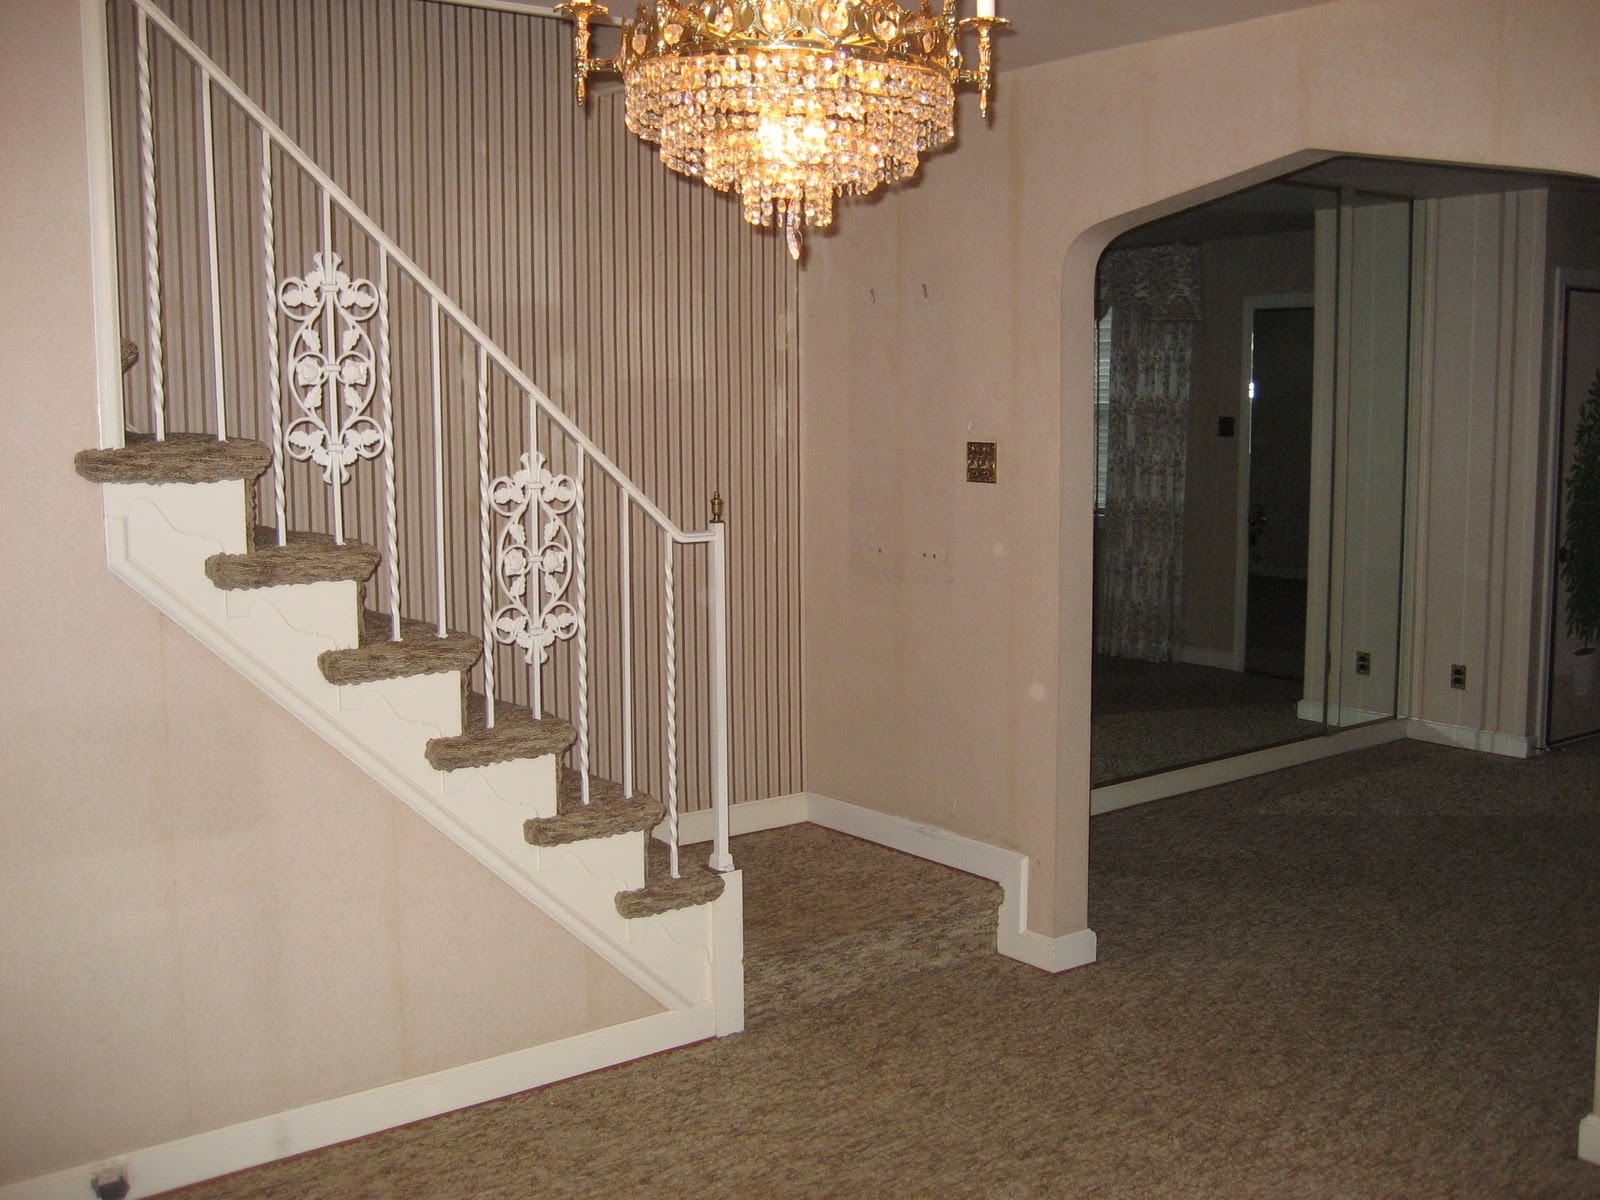 wallpaper borders for living room,stairs,property,room,ceiling,handrail